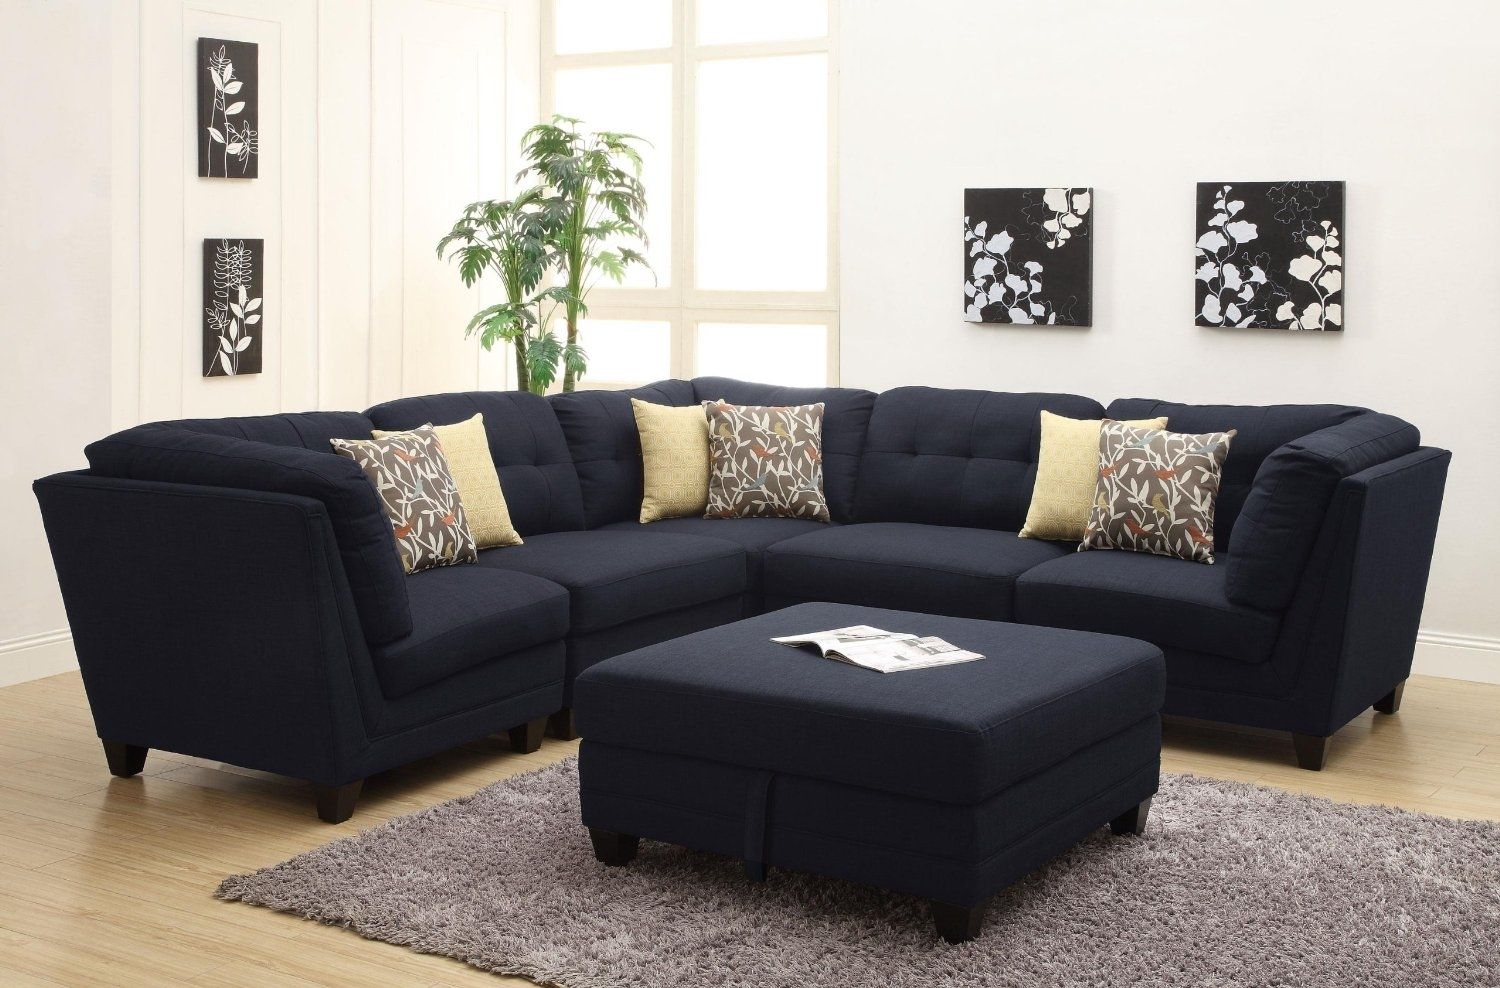 Most Comfortable Sectional Sofa For Fulfilling A Pleasant Atmosphere Regarding Comfortable Sectional Sofas (View 5 of 10)